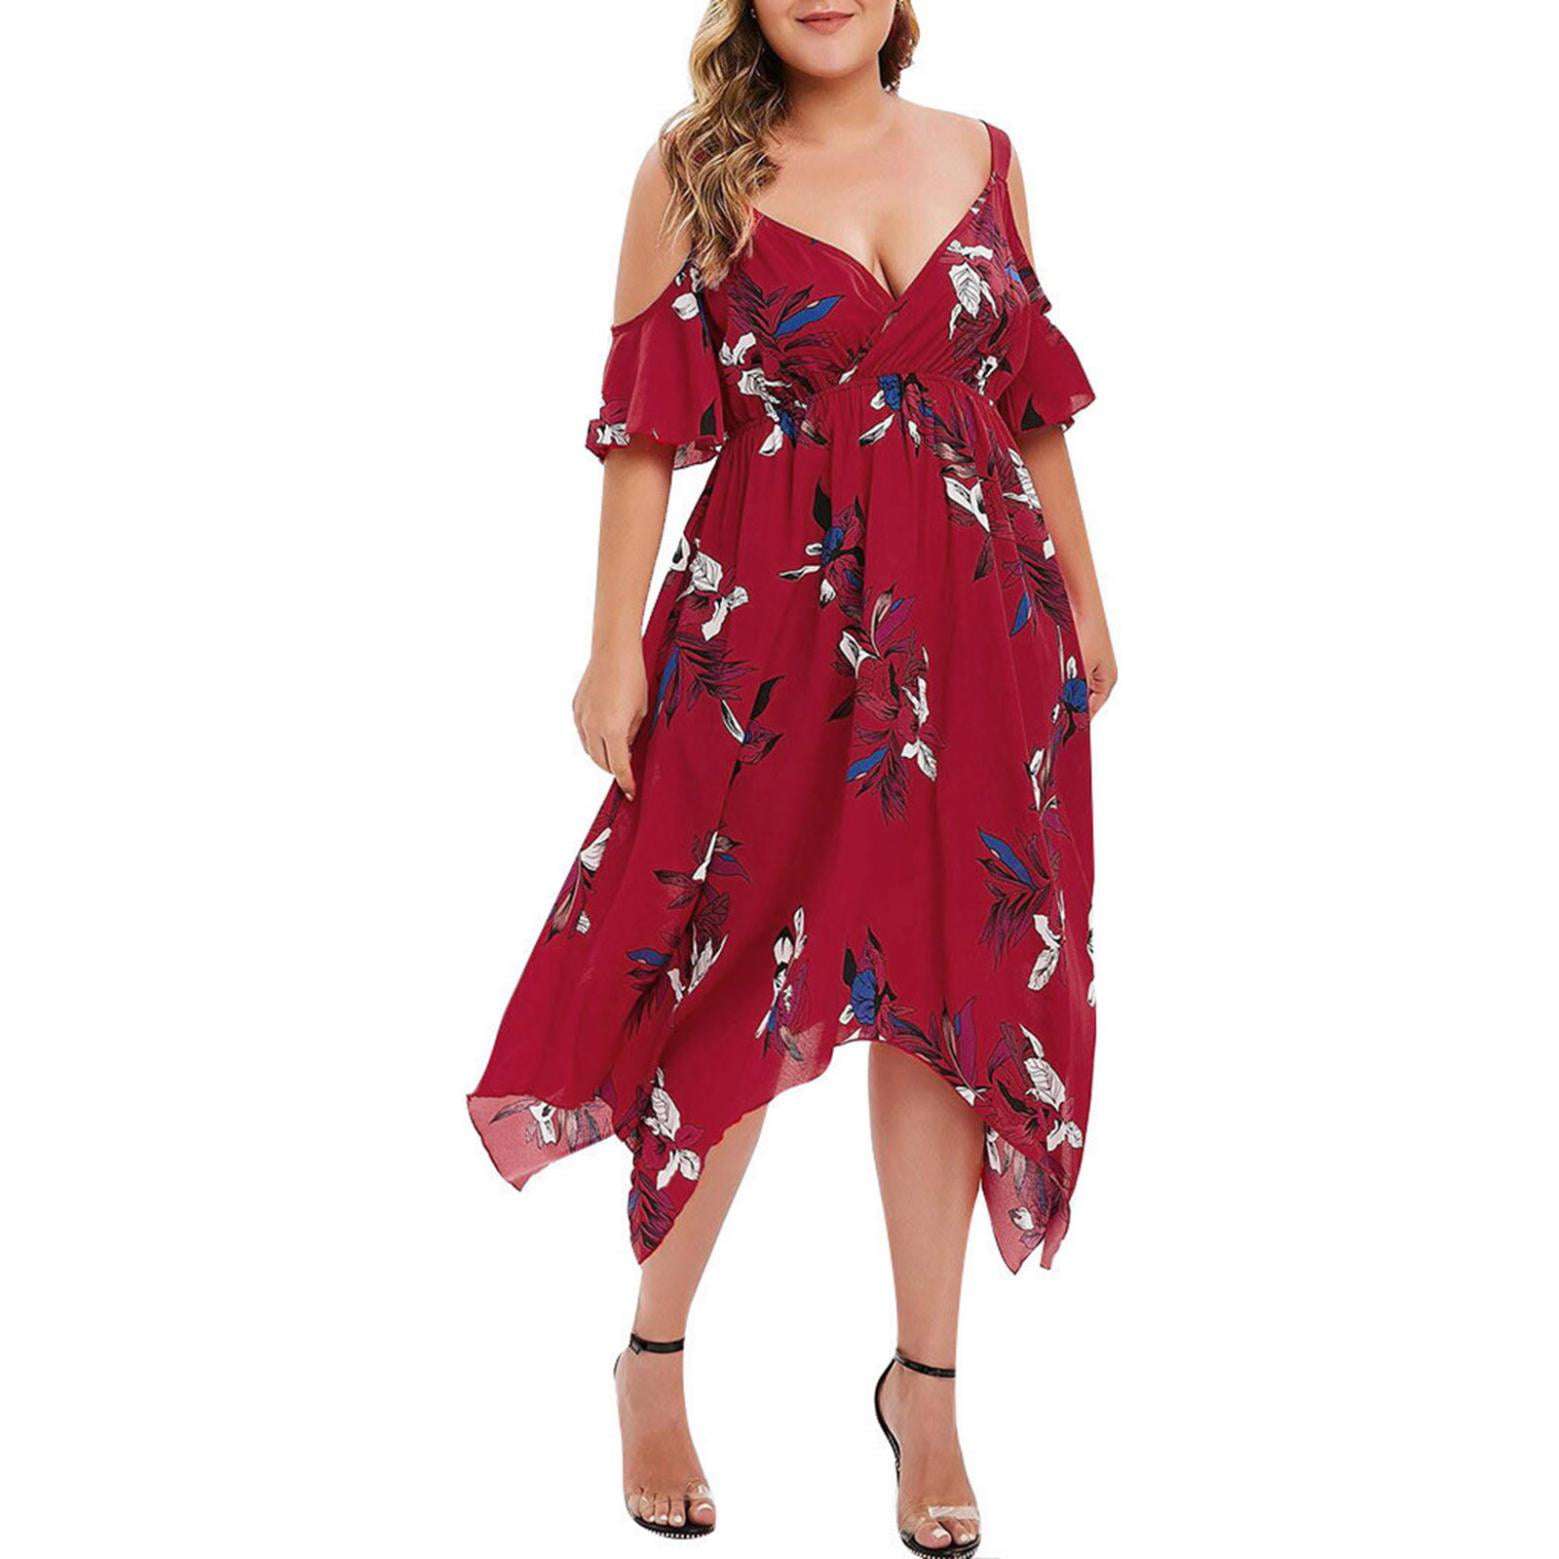 qucoqpe Summer Sundresses for Women Plus Size Casual Floral Printed ...